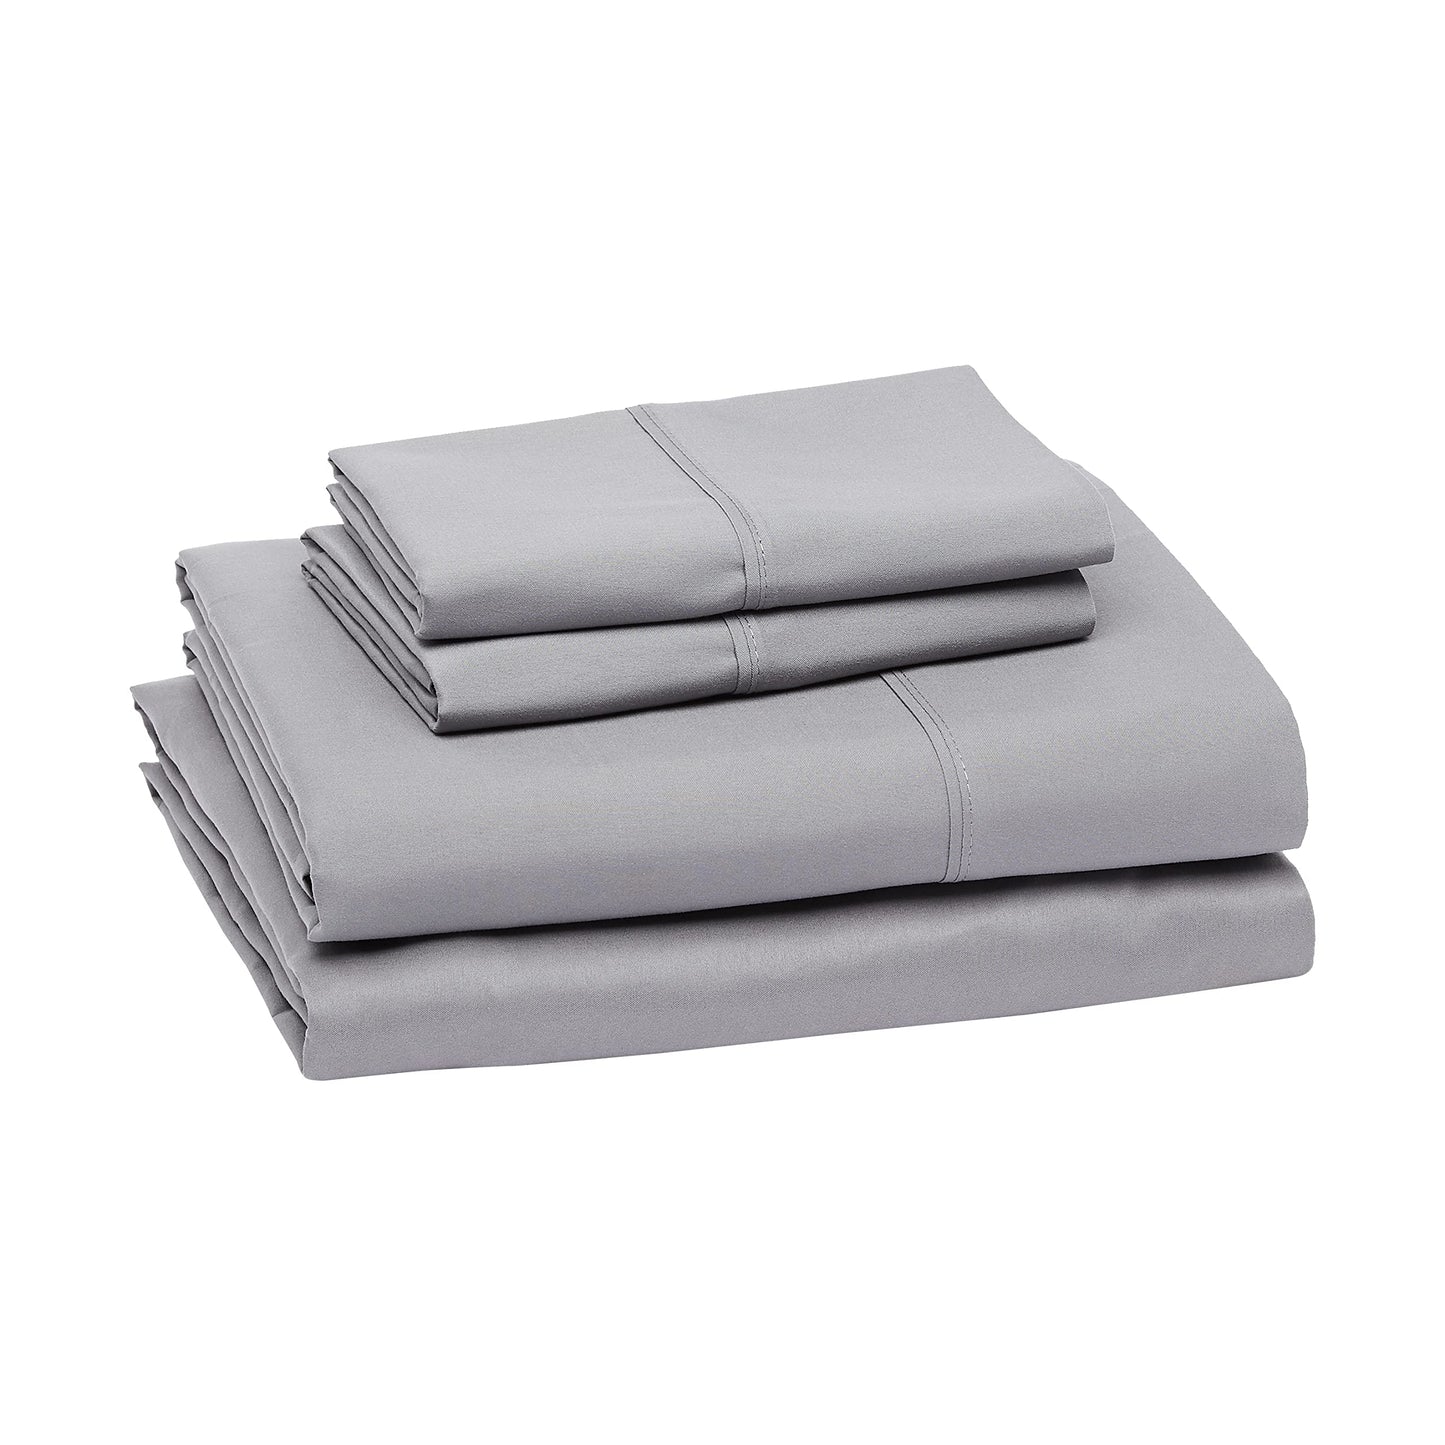 Amazon Basics Lightweight Super Soft Easy Care Microfiber 4-Piece Bed Sheet Set with 14-Inch Deep Pockets, King, Dark Gray, Solid - Pack of 4